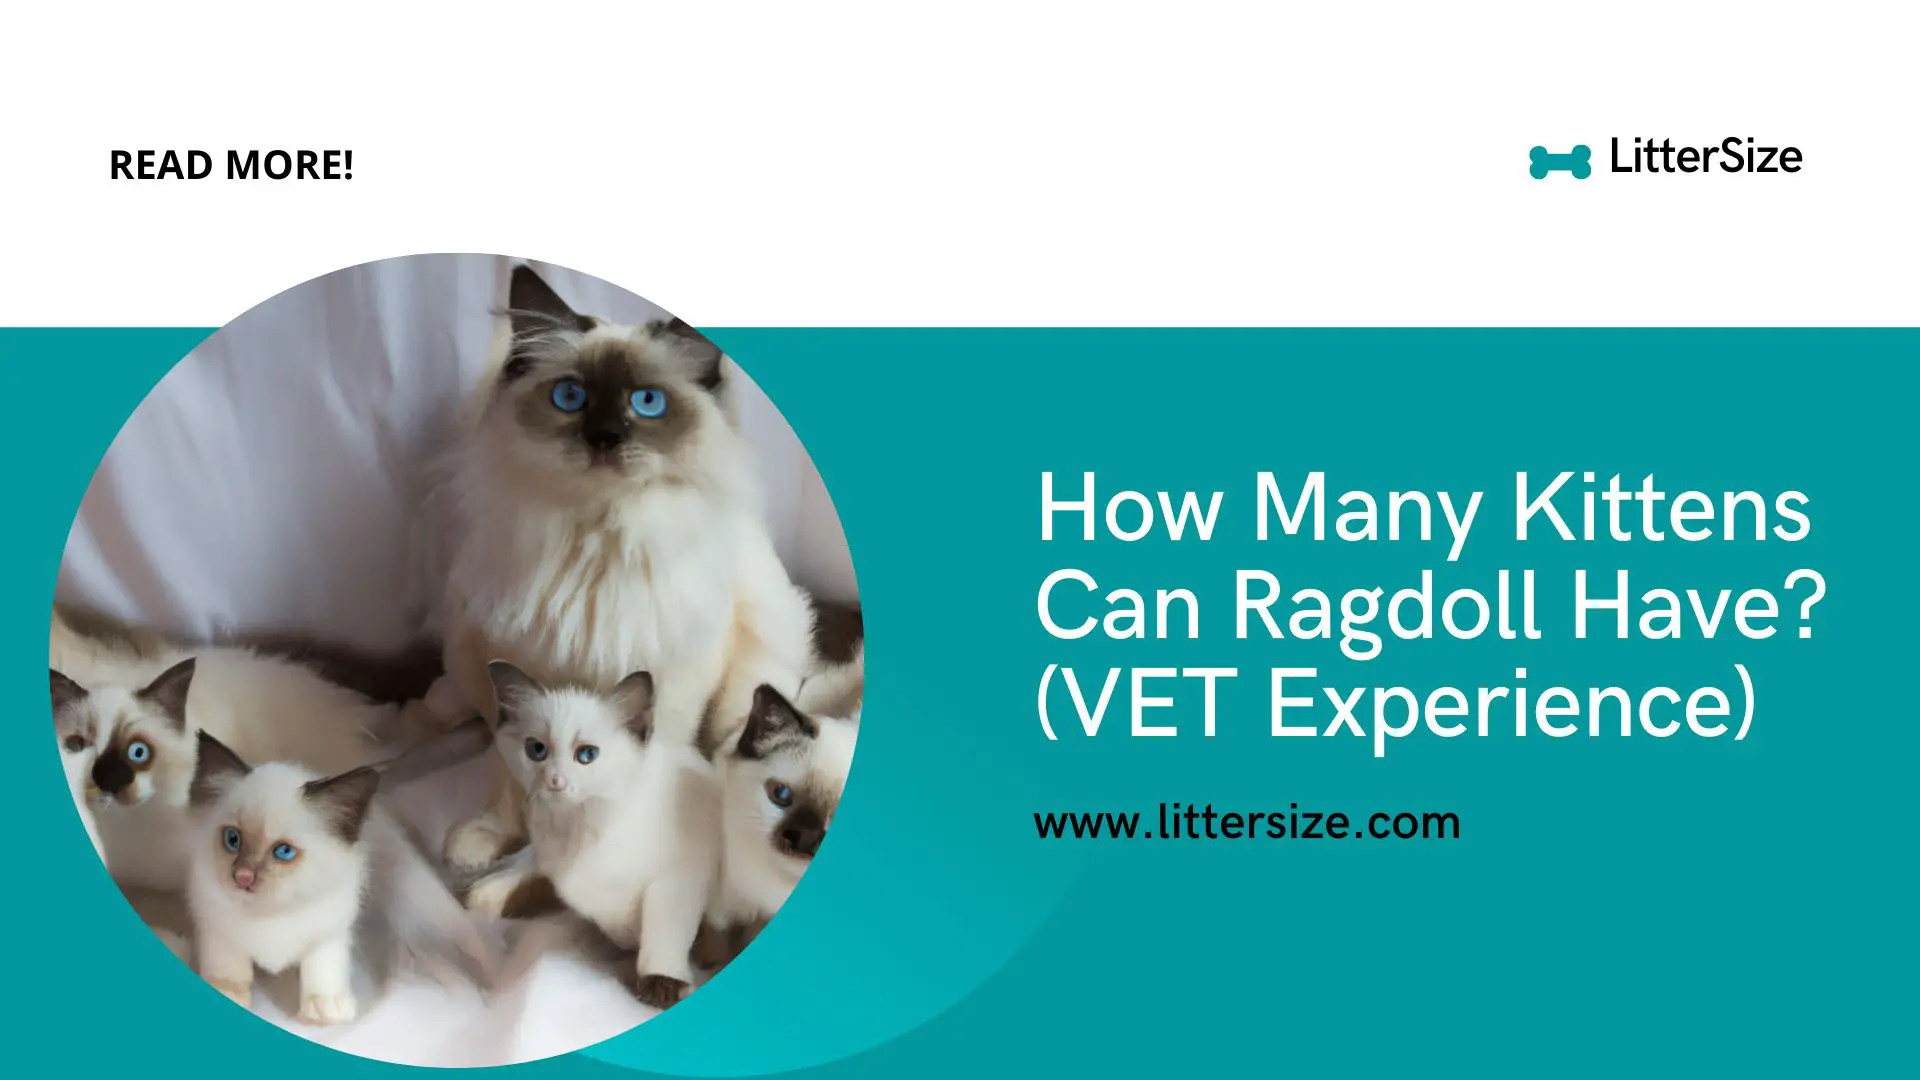 How Many Kittens Can Ragdoll Have? (VET Experience)